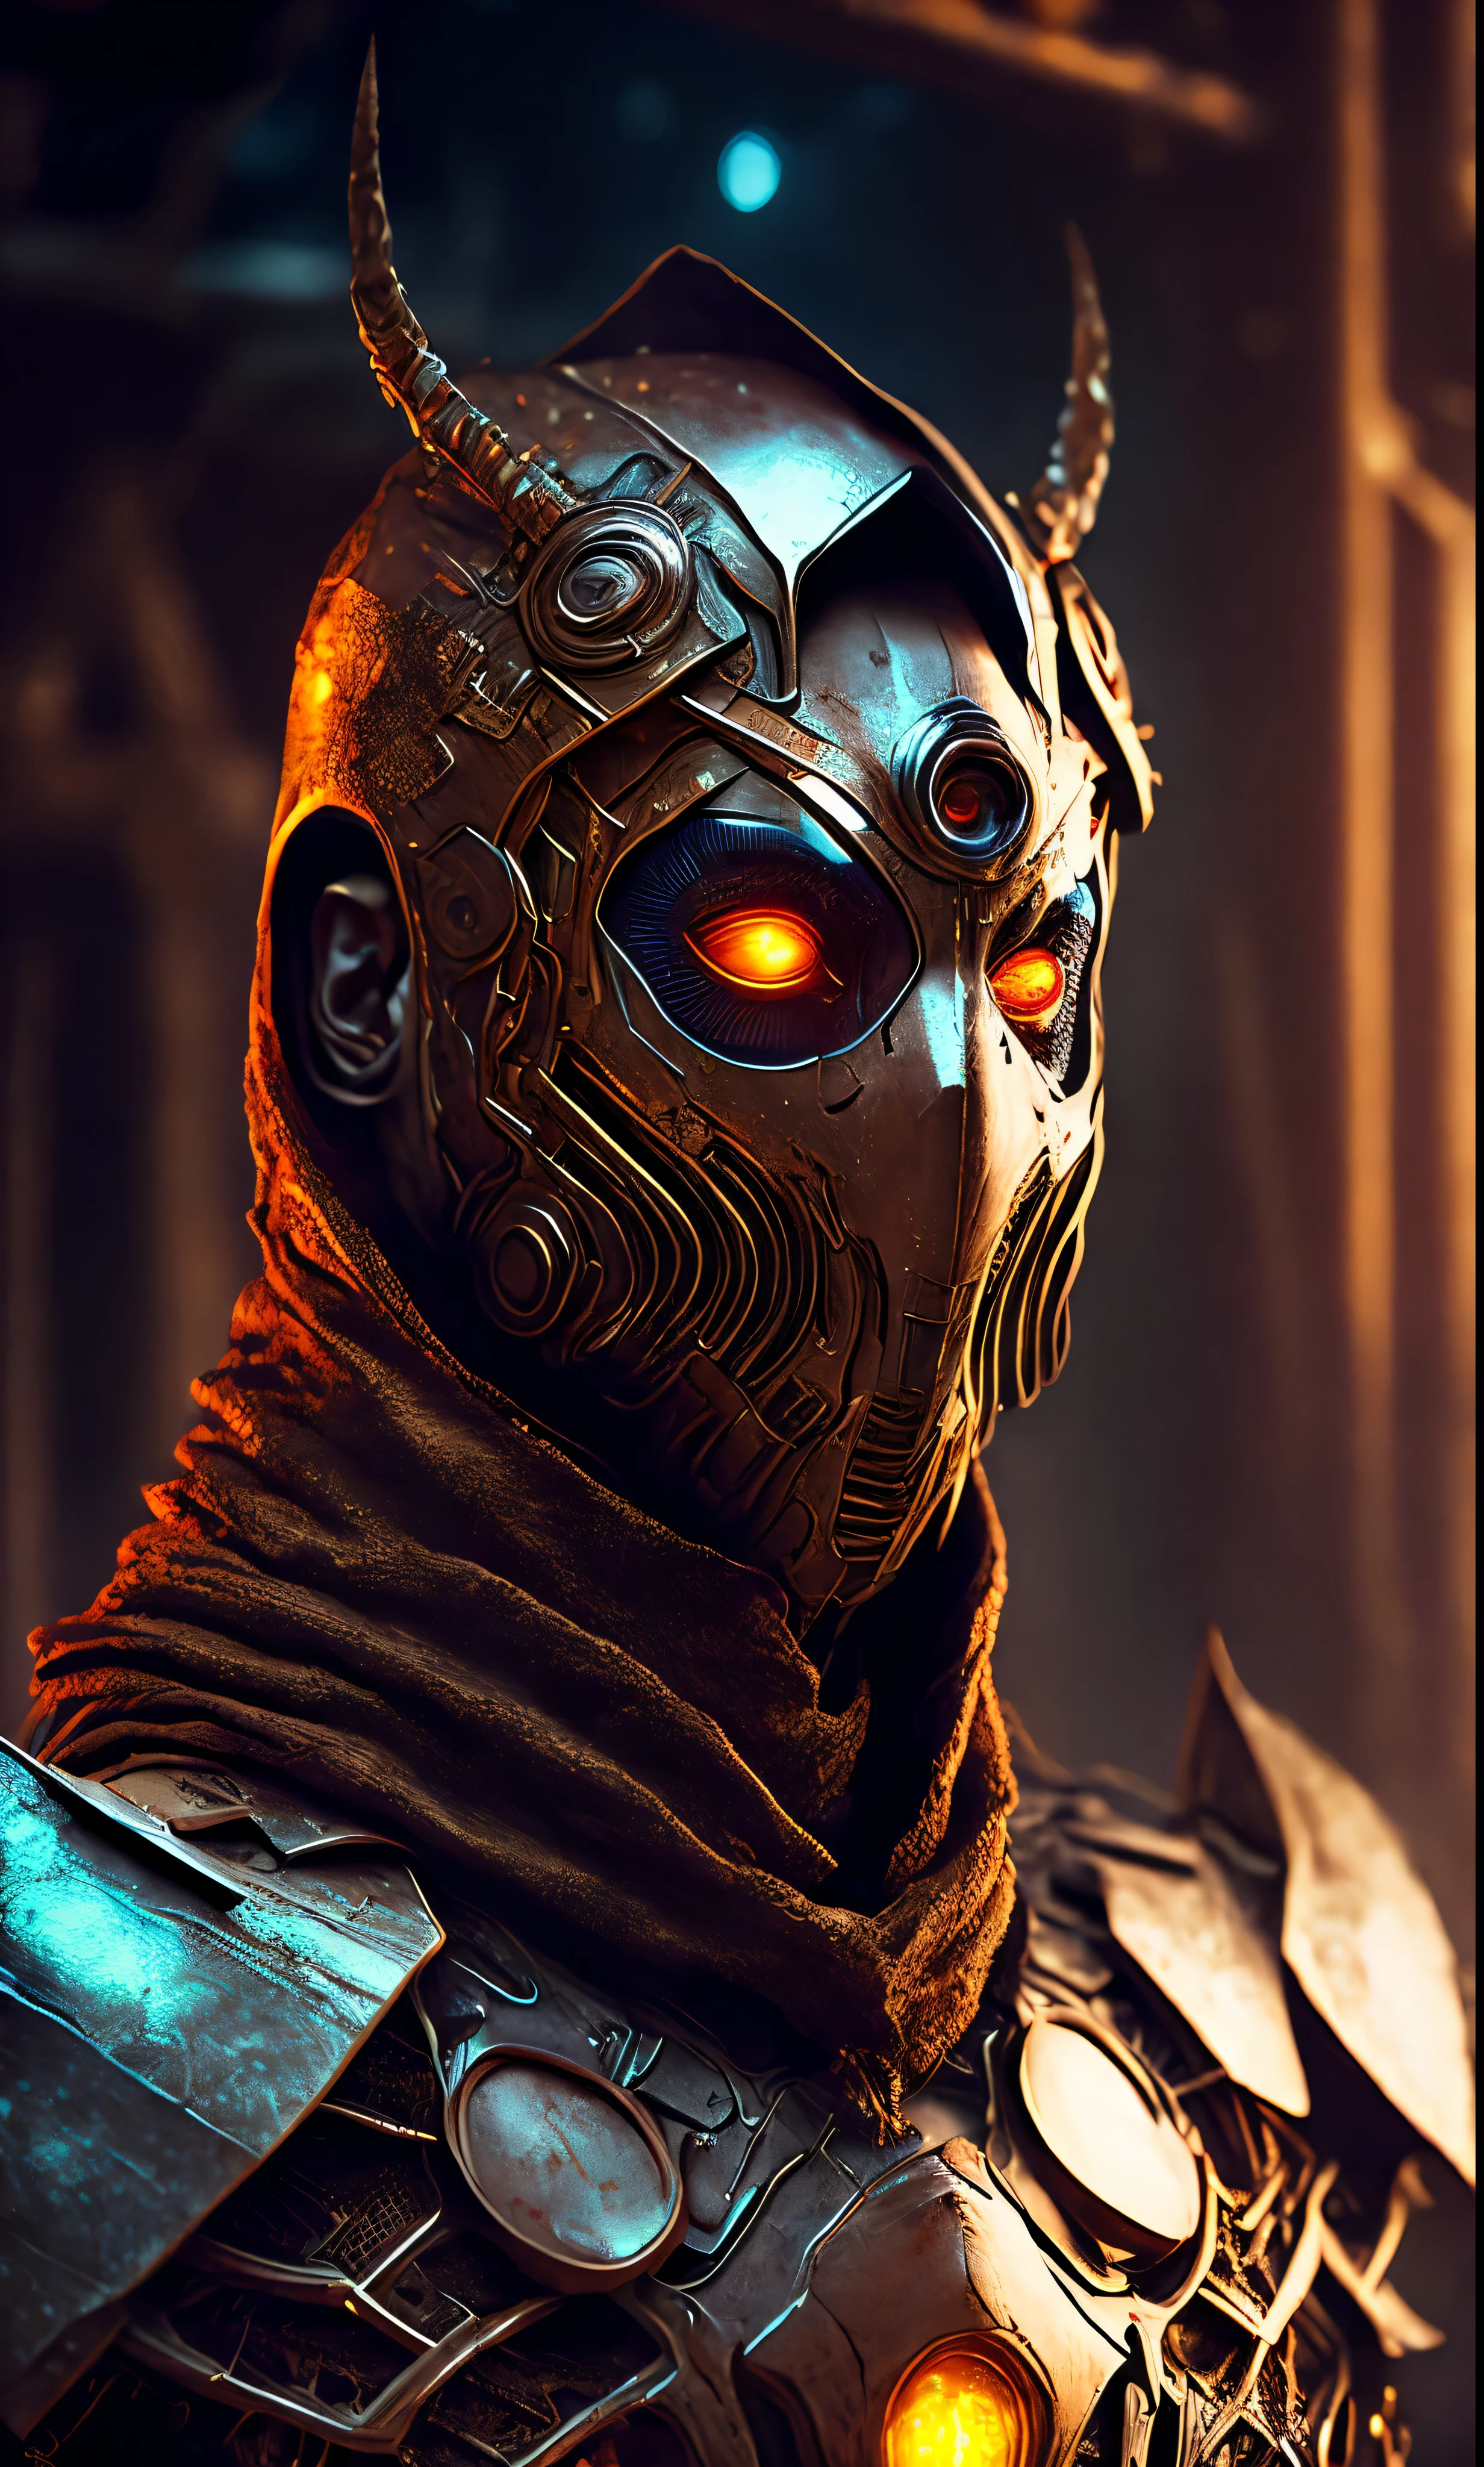 Breathtaking sci-fi cinematic photo of a portrait of a masked non-human Grim wrapped in a brown chrome metal skin, body full of shiny metrics inside, olhos multicoloridos brilhantes, olhos multifacetados, metal arms, inside a destroyed building, extremely threatening creature, altamente detalhado, premiado